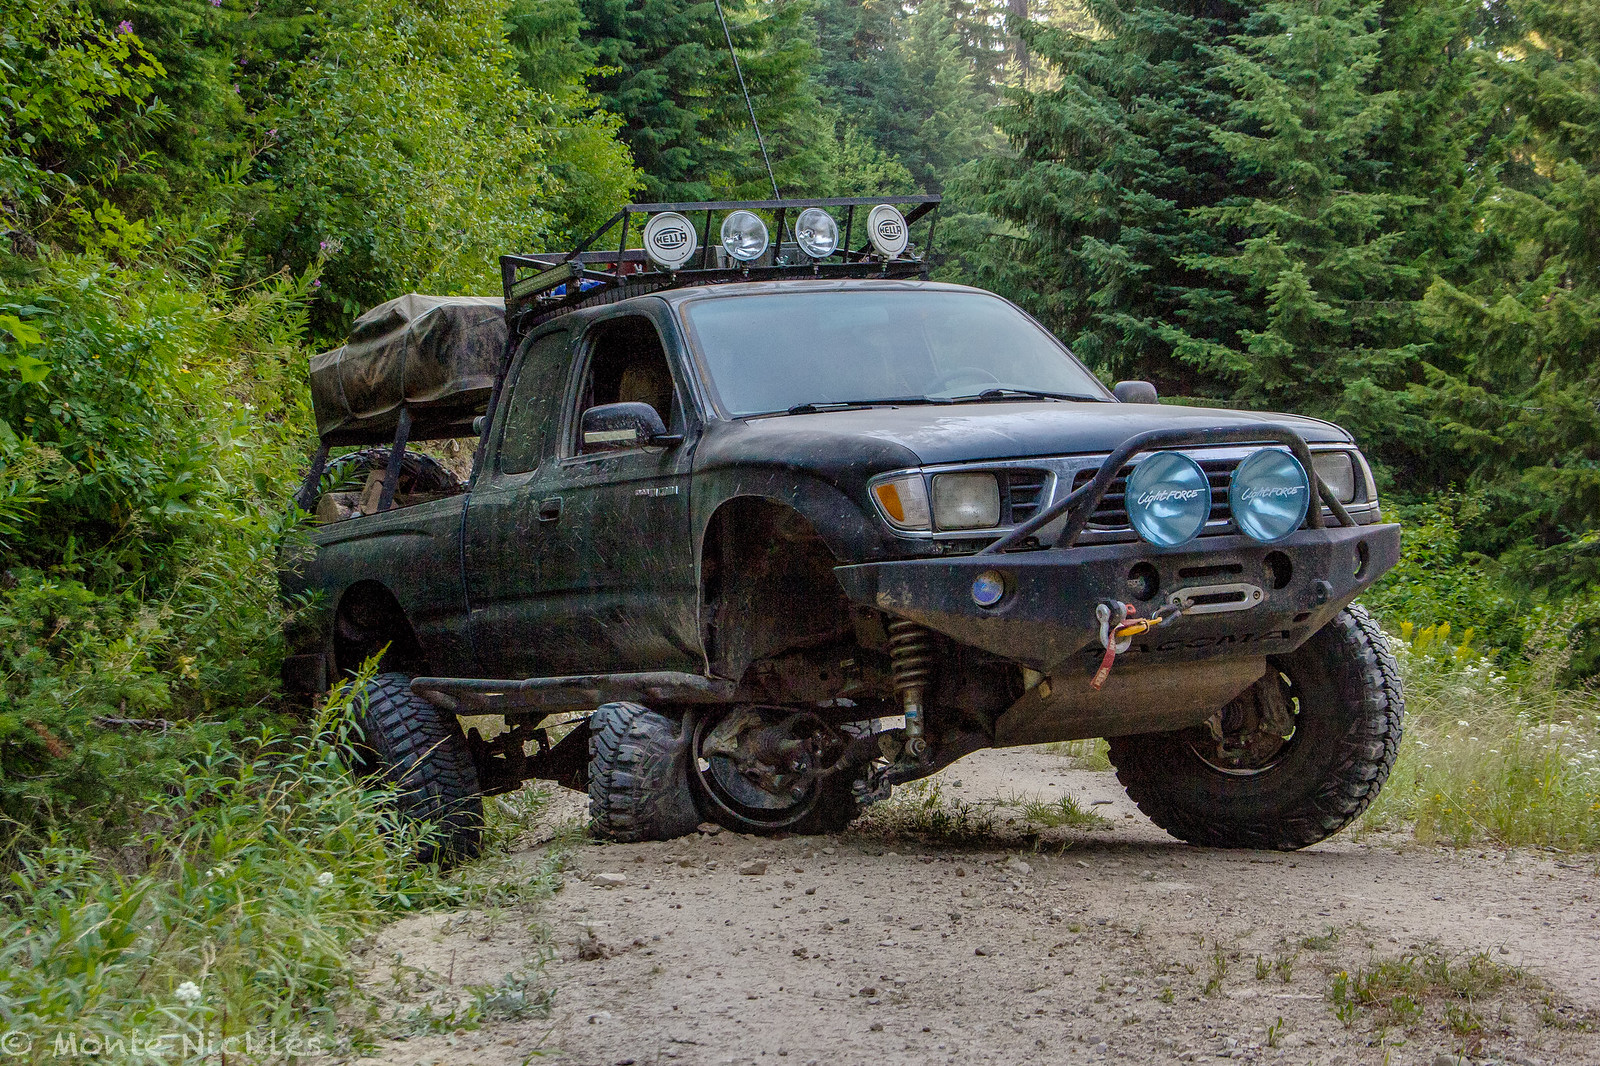 Mad runner expedition. Toyota 4runner 1995 off Road. 4runner 1st Gen. Toyota 4runner 1993. 4runner Expedition off Road.